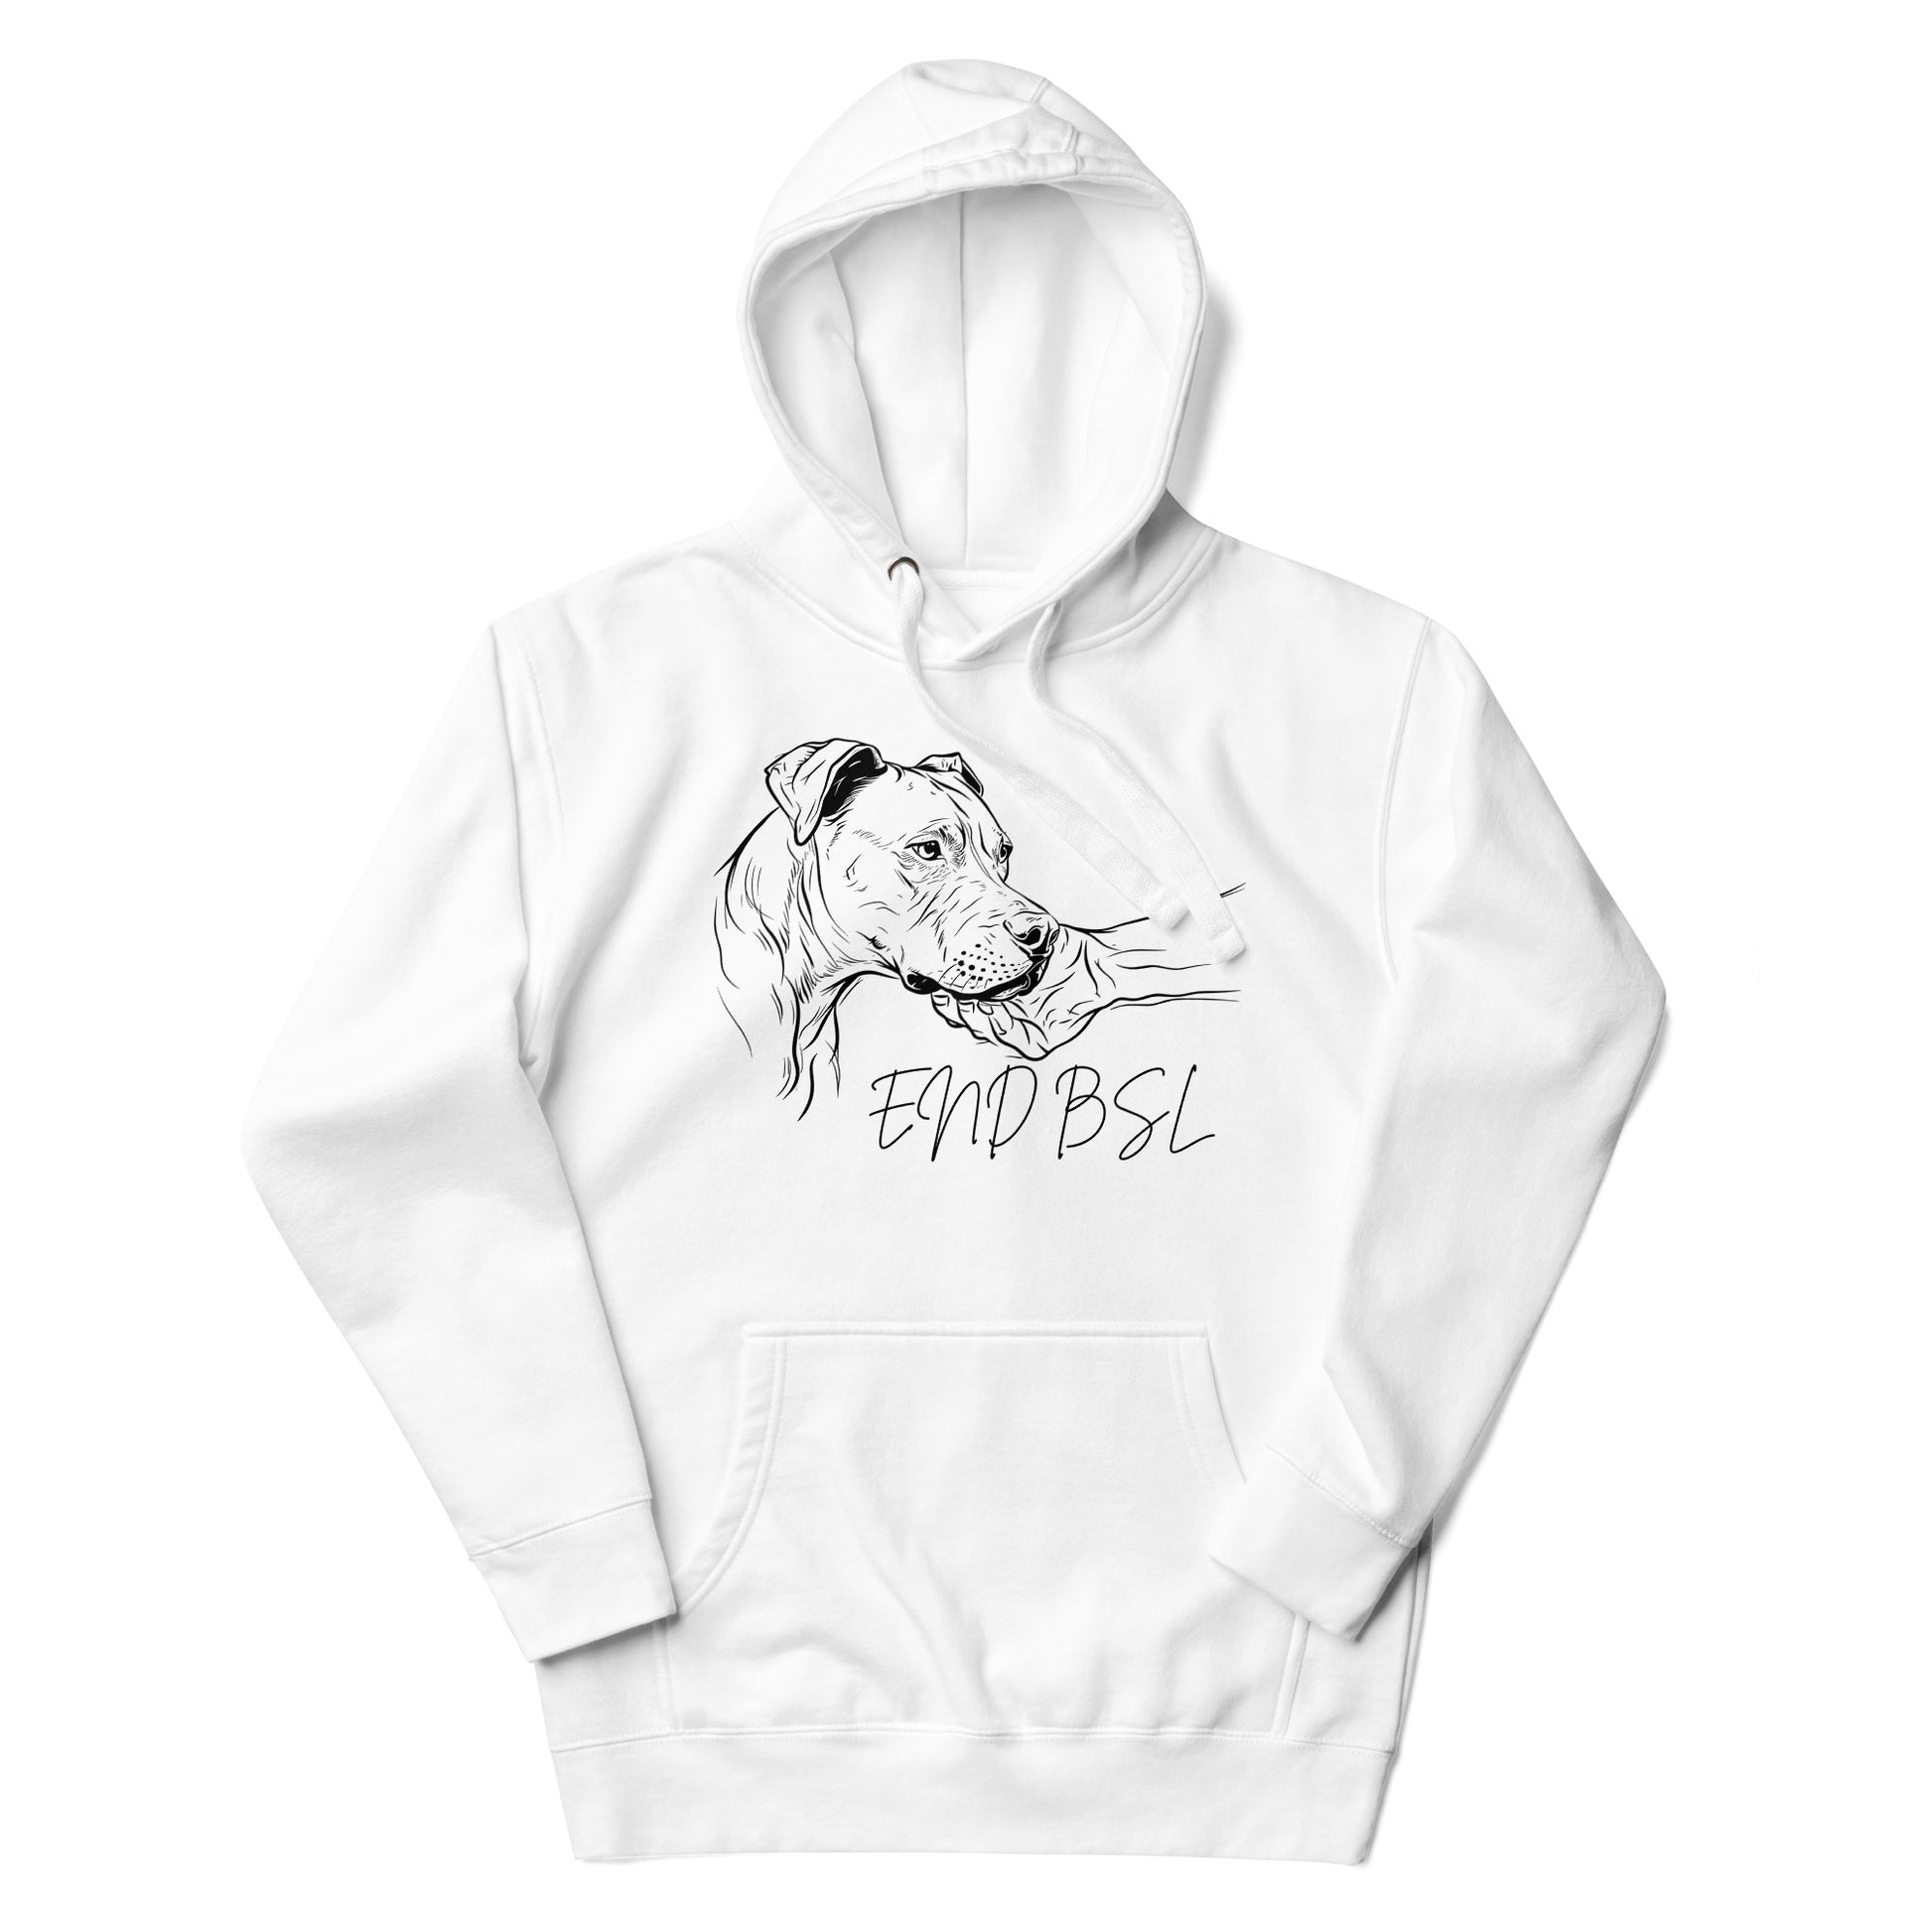 "End BSL" Pit Bull Hoodie for Women - Advocate with Comfort and Style - Pittie Choy